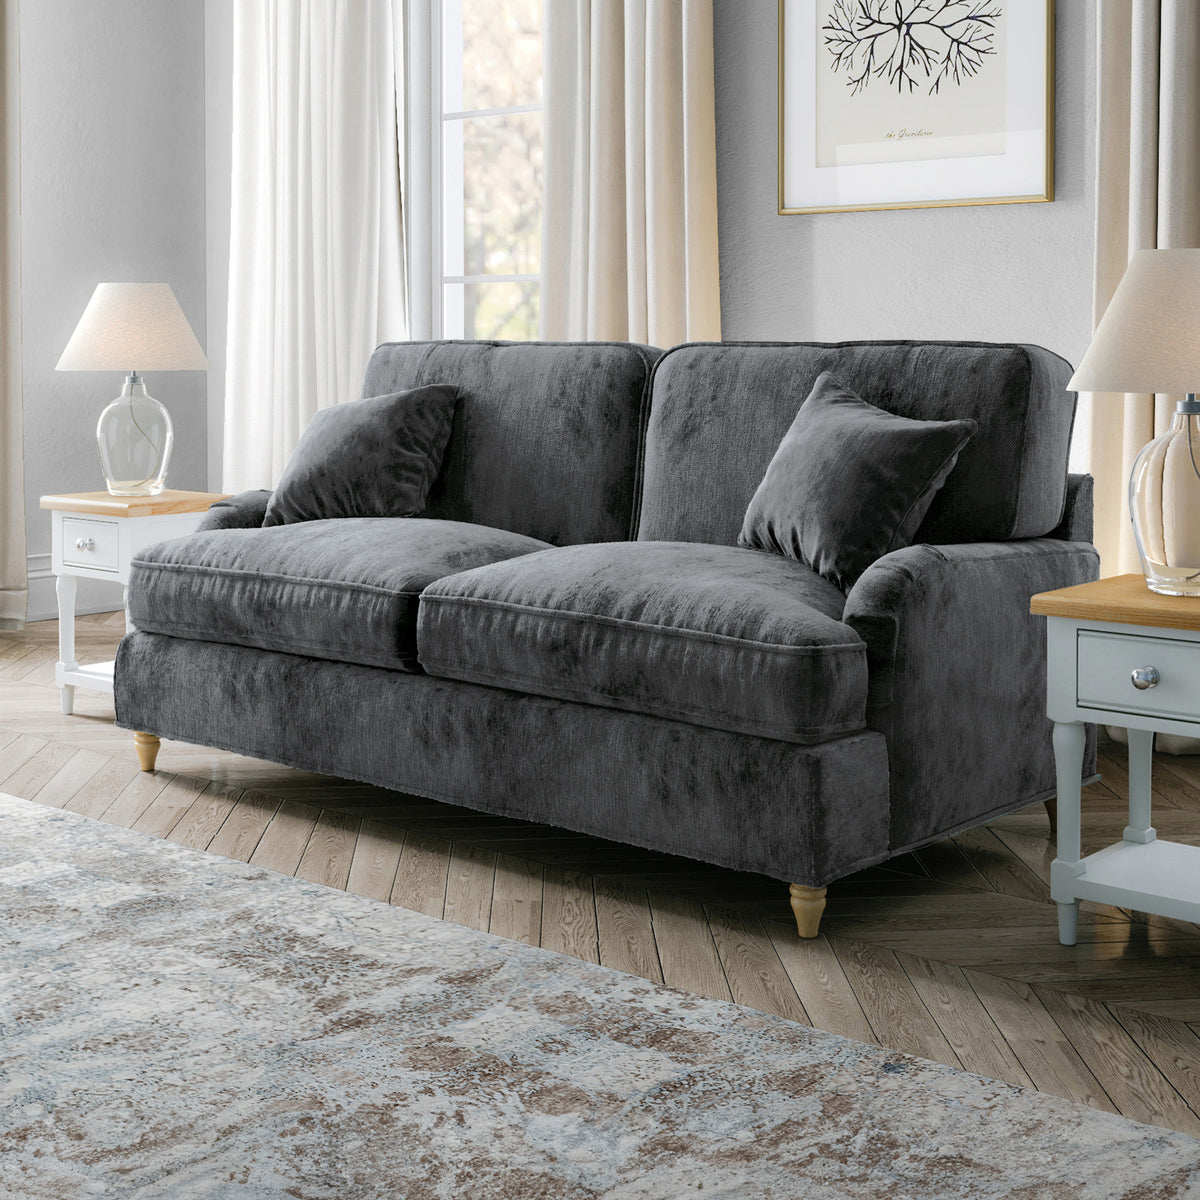 Arthur Charcoal 3 Seater Sofa from Roseland Furniture